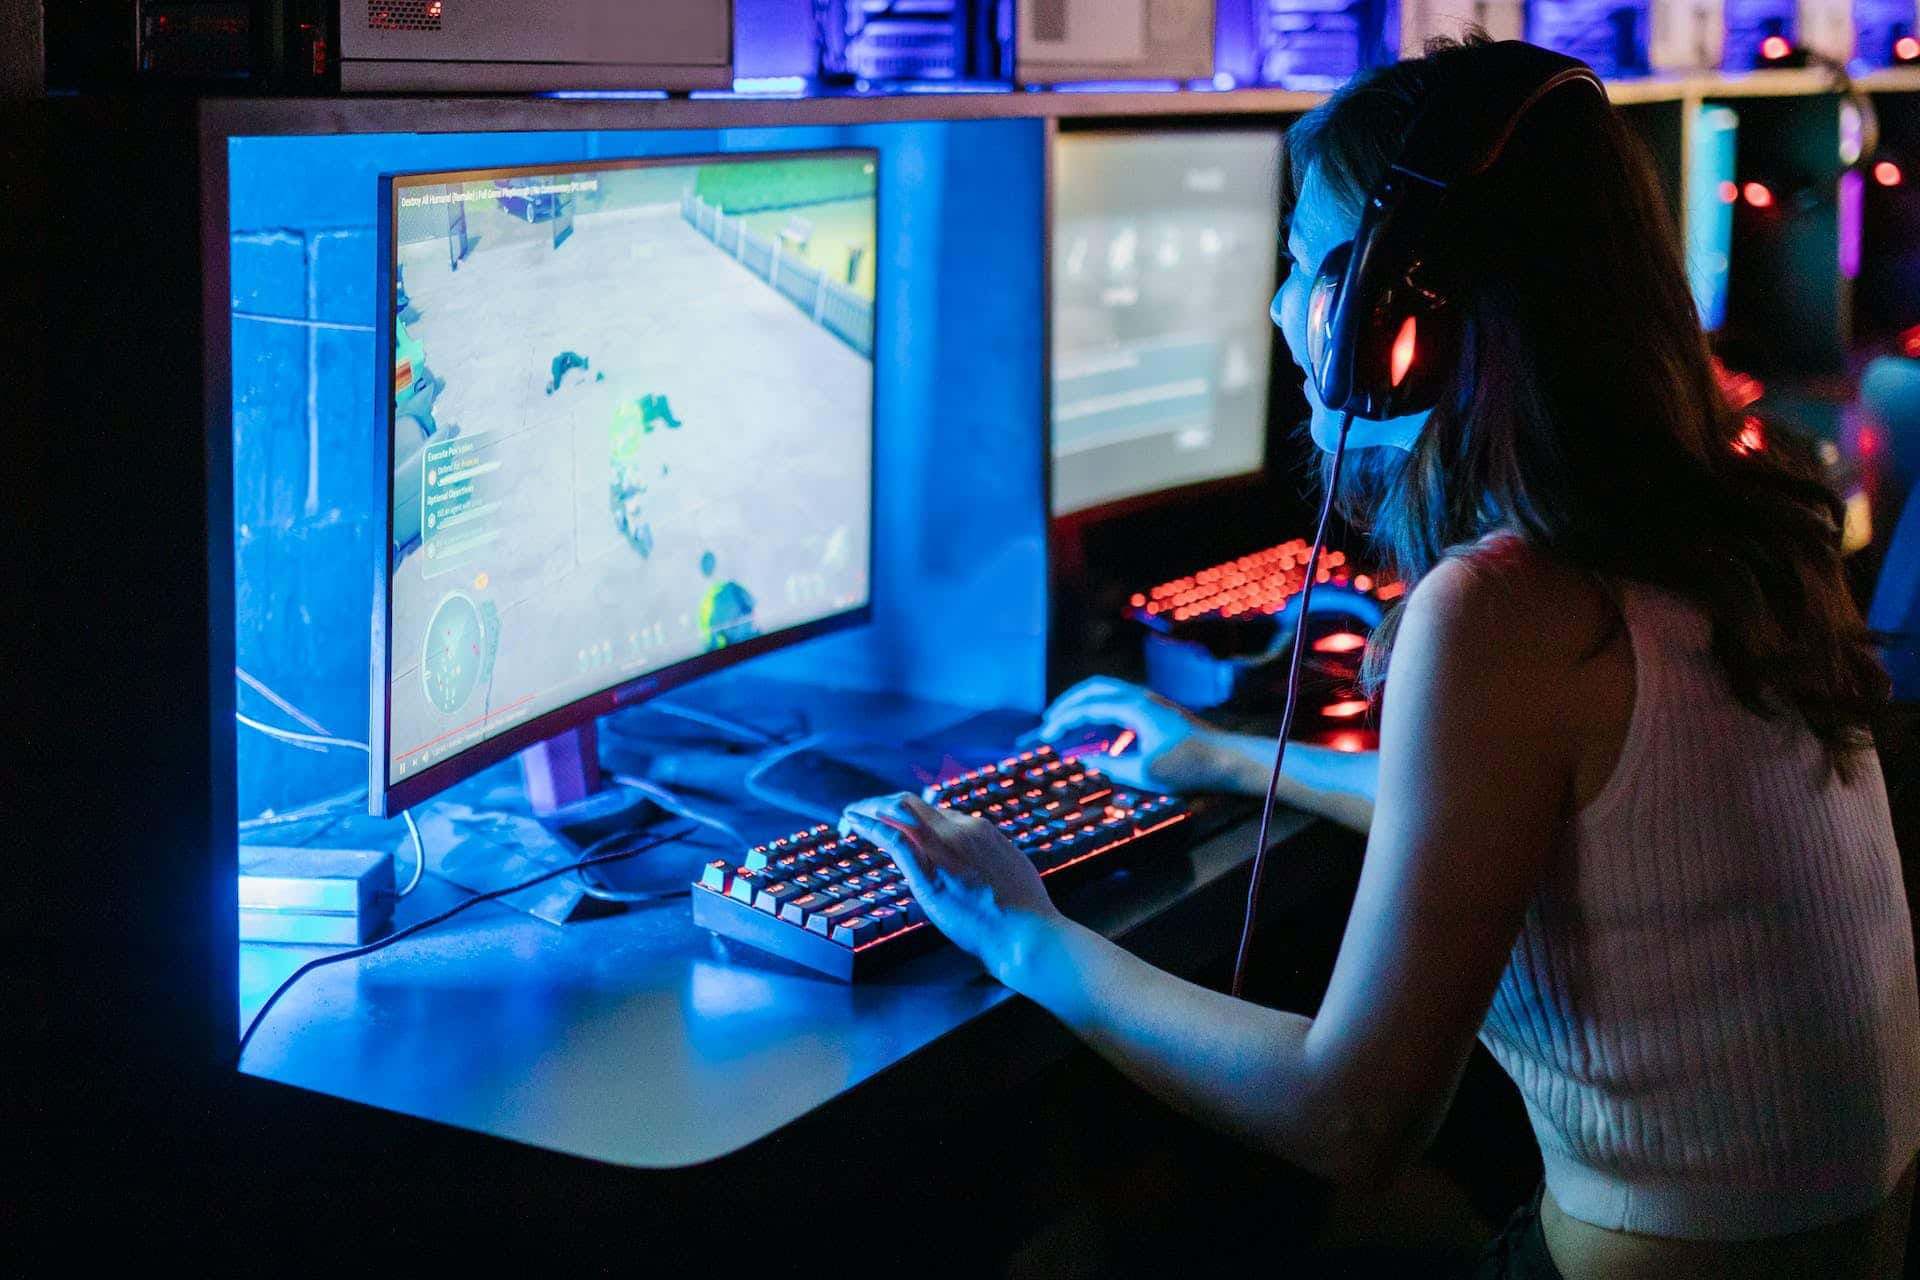 Teen girl excitedly plays a video game on a desktop with neon lights surrounding it